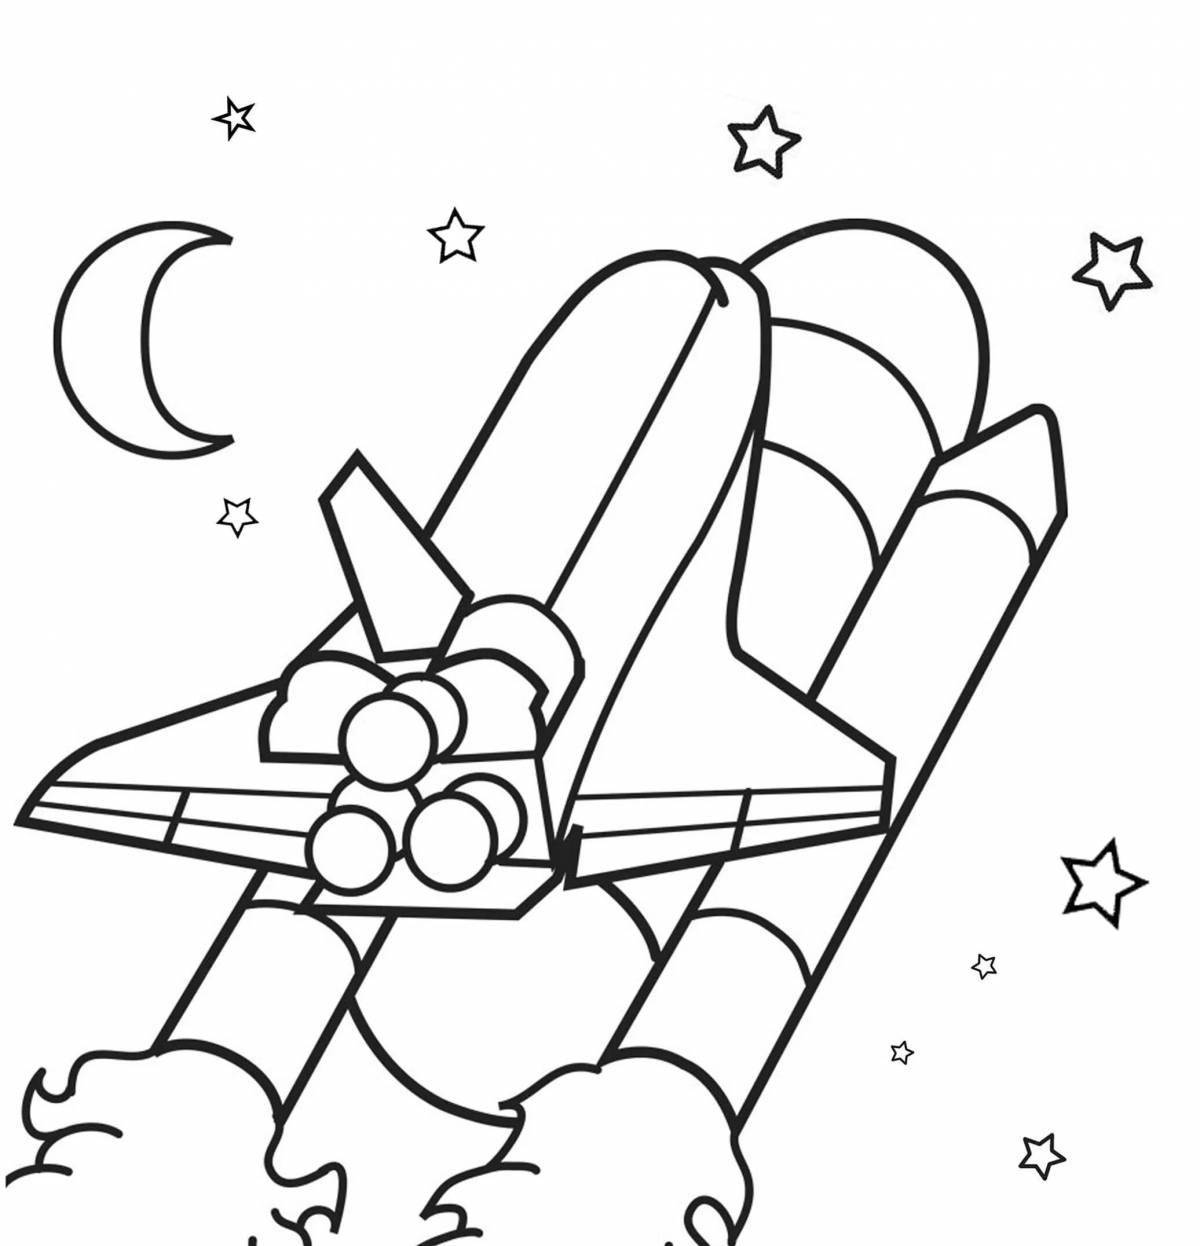 Colorful space rocket coloring page